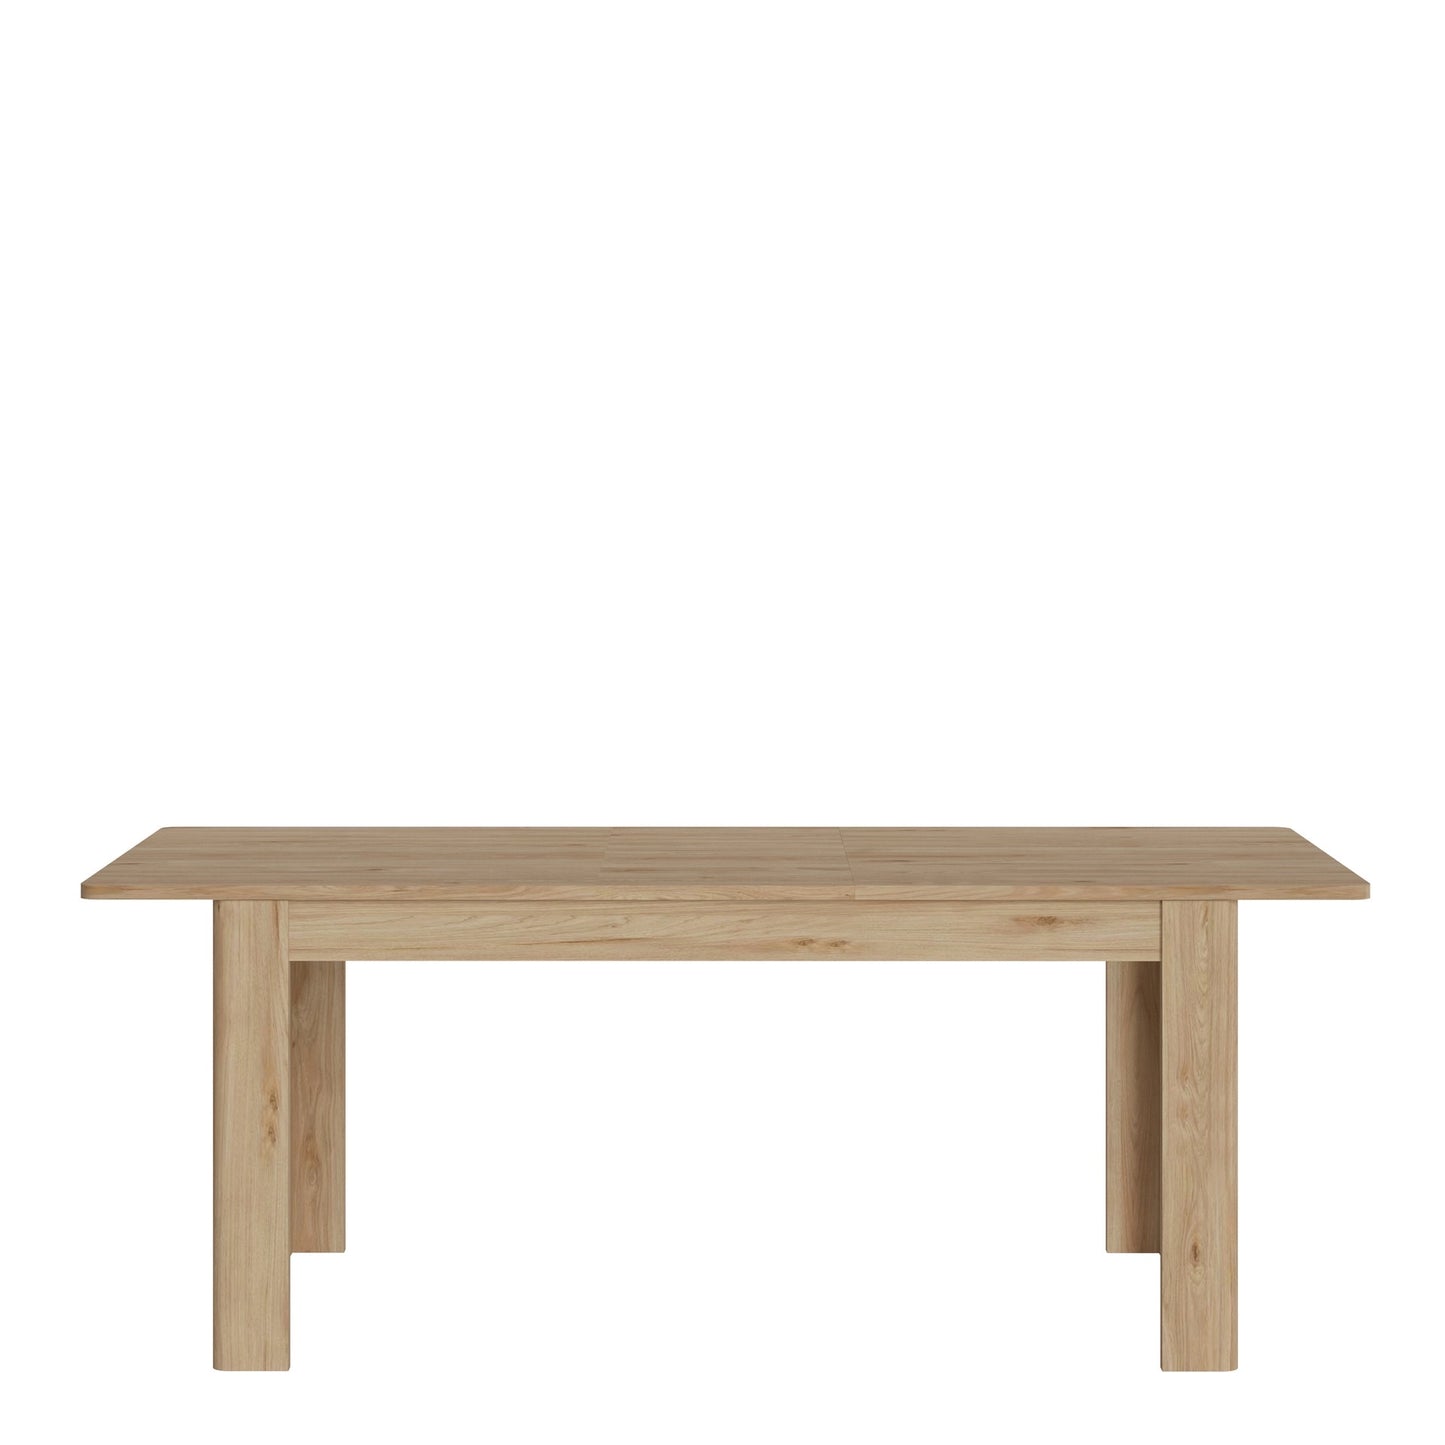 Furniture To Go Cestino Extendable Table 160-200cm in Jackson Hickory Oak Effect